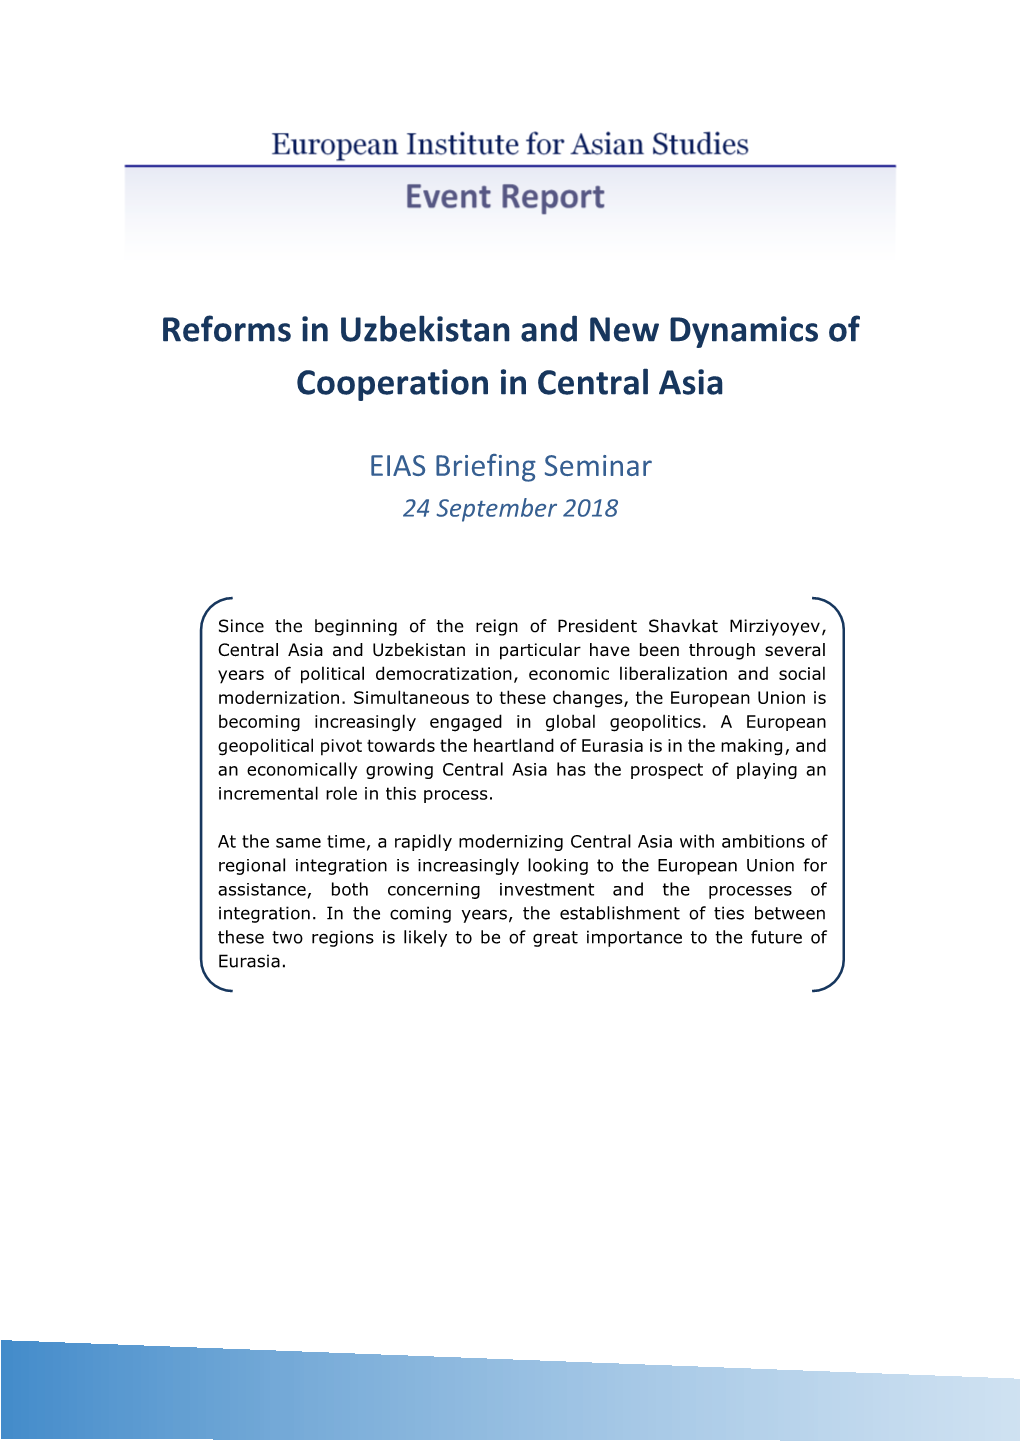 Reforms in Uzbekistan and New Dynamics of Cooperation in Central Asia